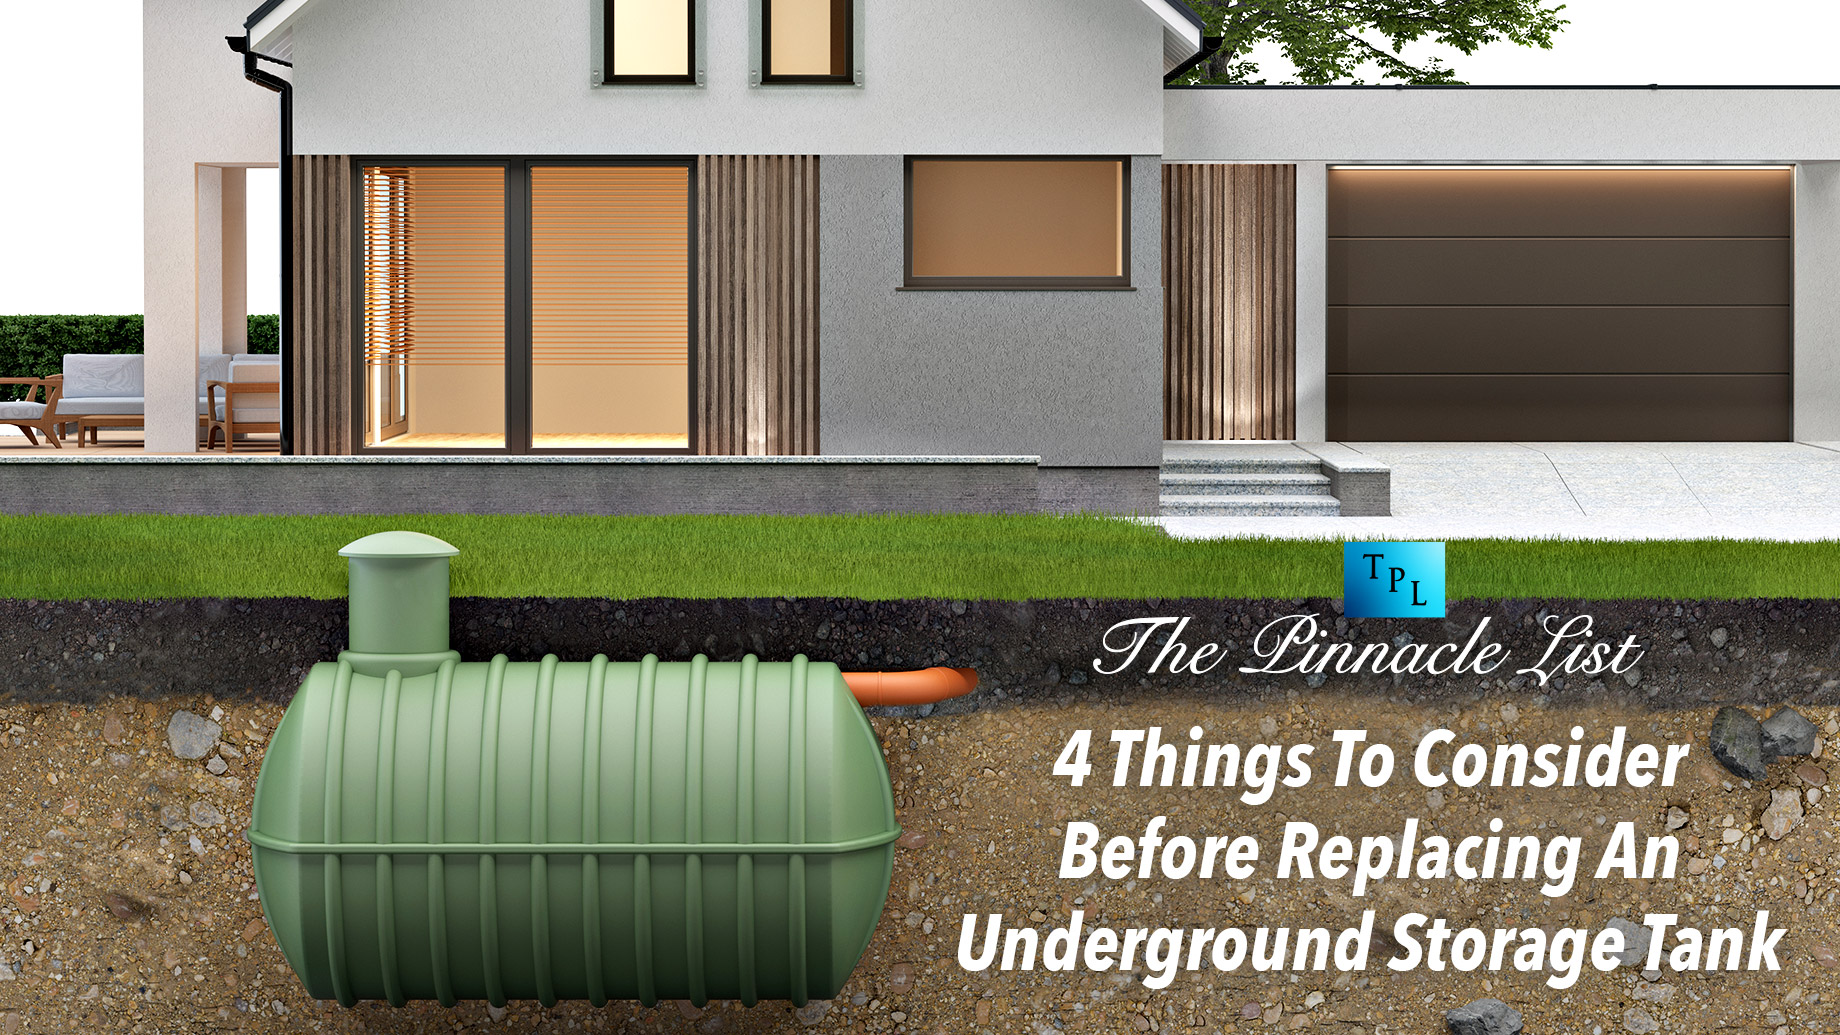 4 Things To Consider Before Replacing An Underground Storage Tank